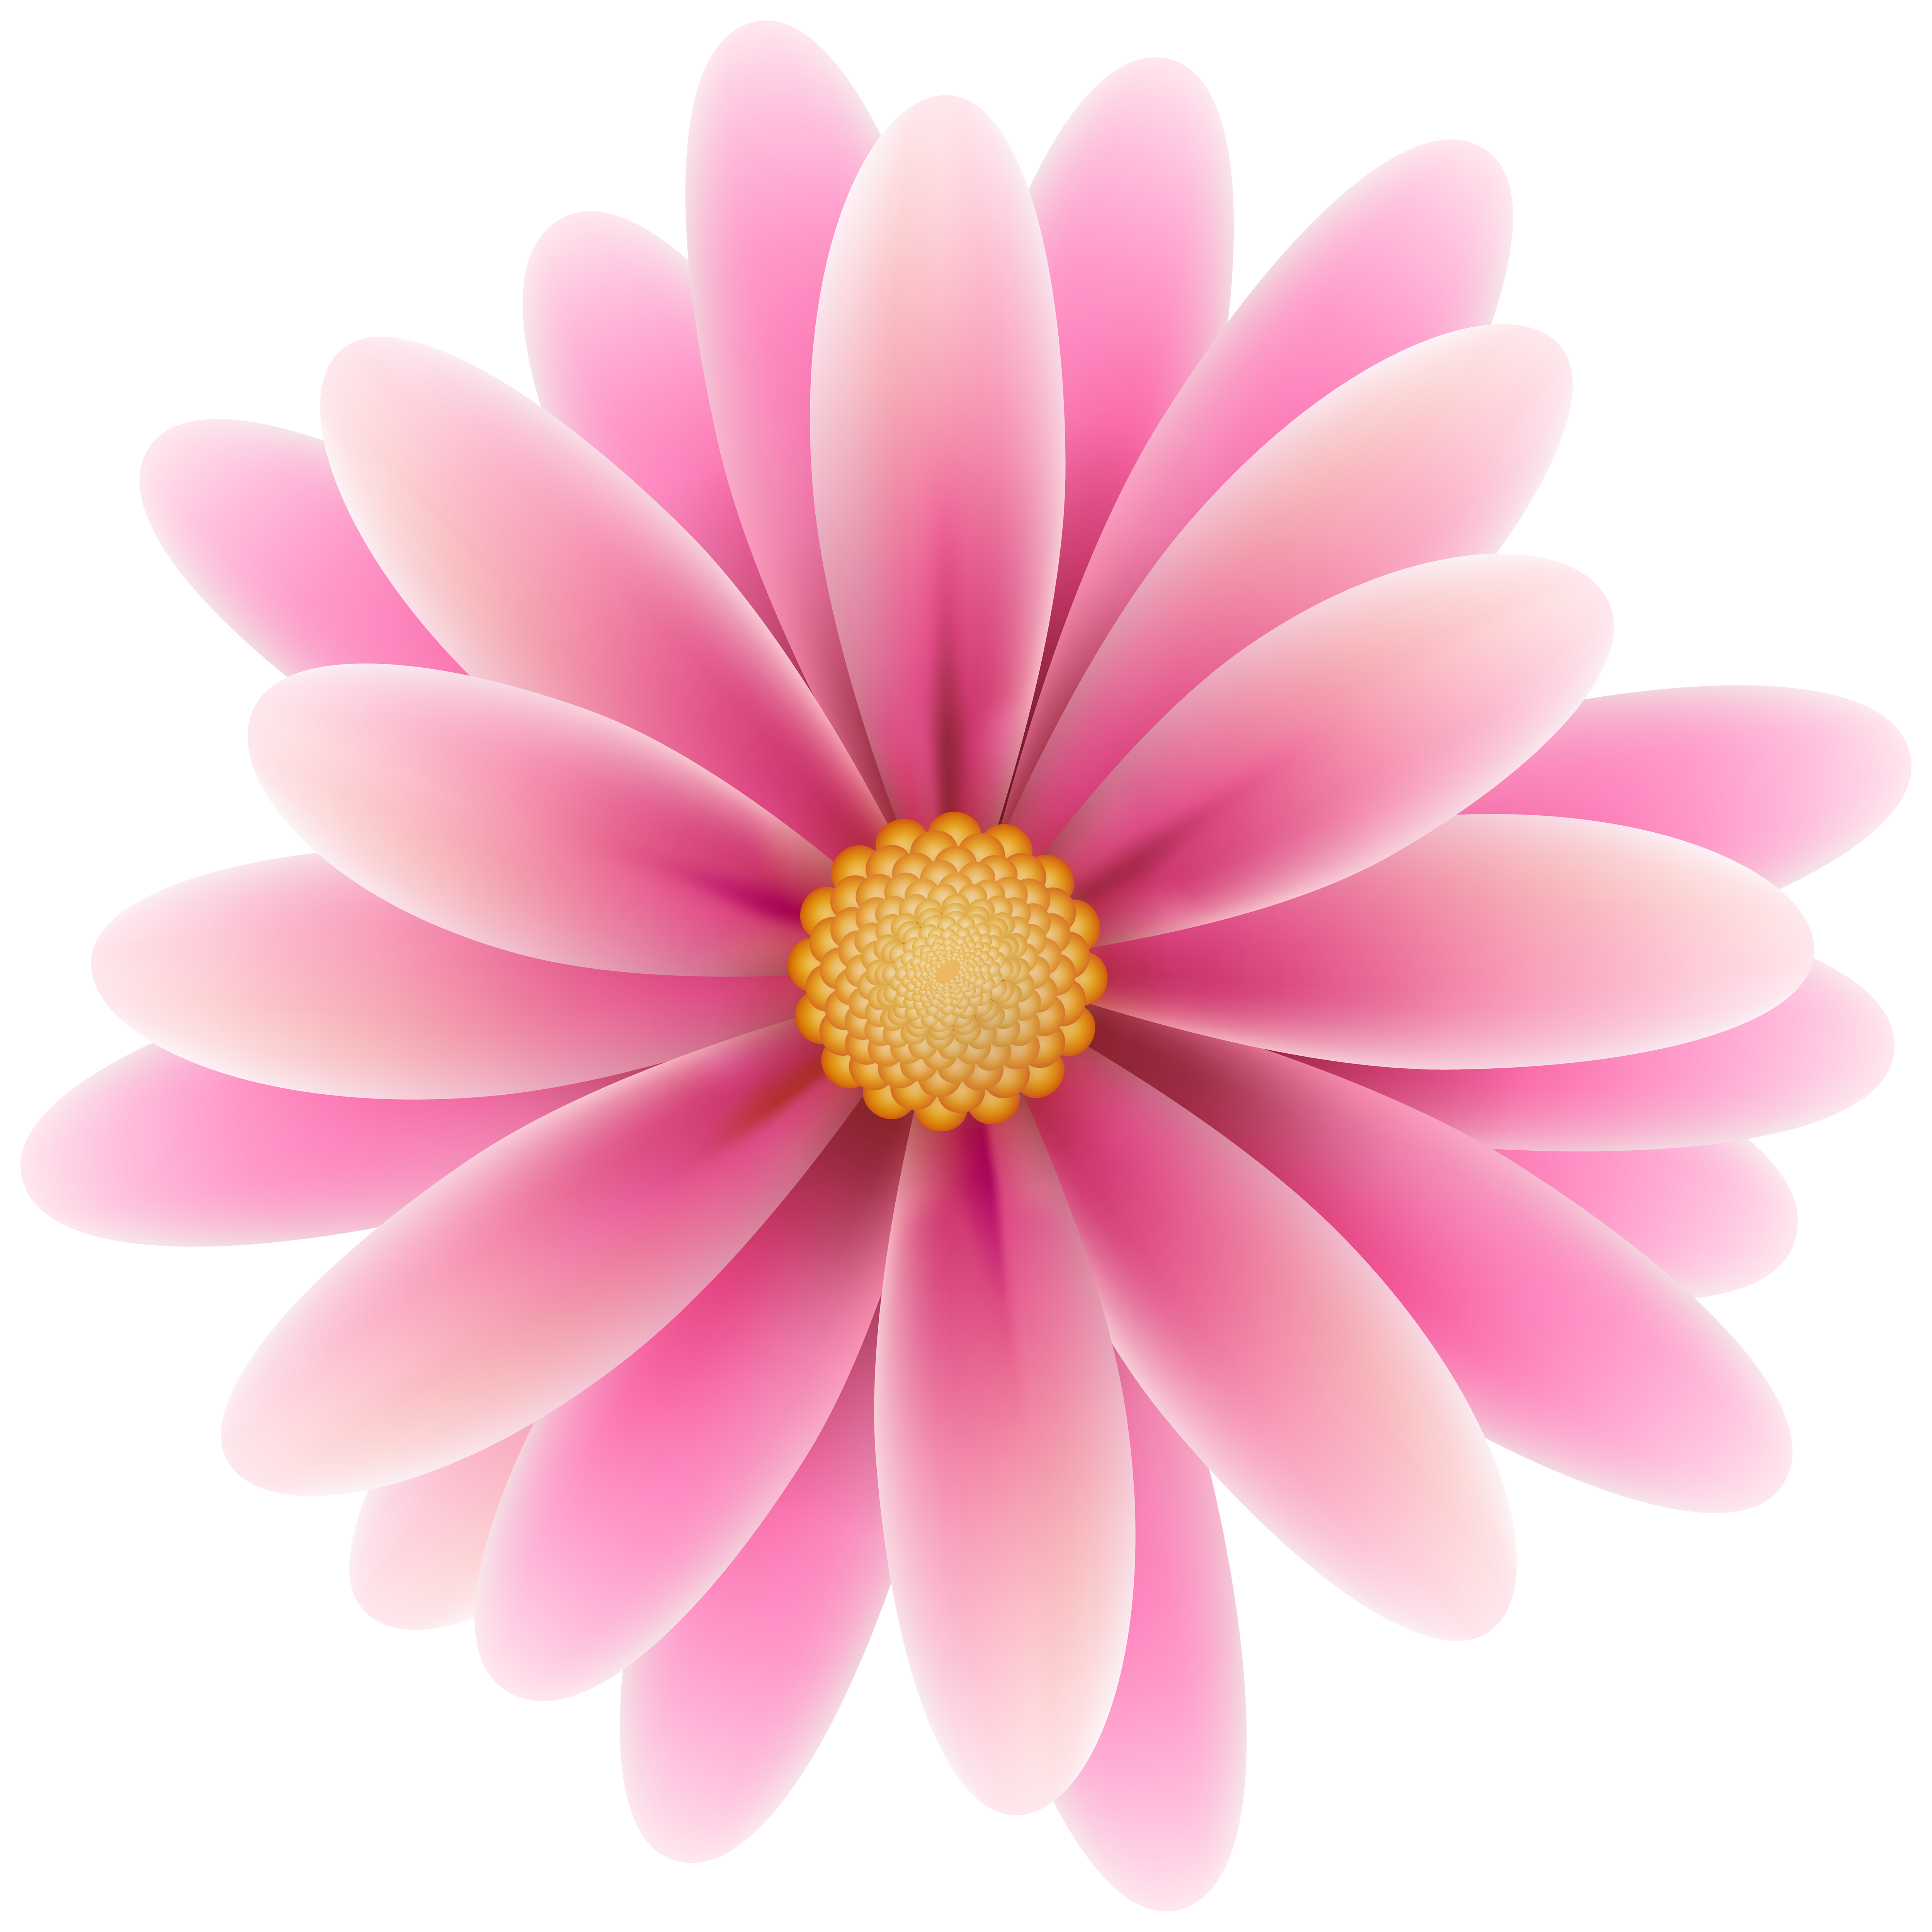 Pink Flower Clip Art Image | Gallery Yopriceville - High-Quality ...